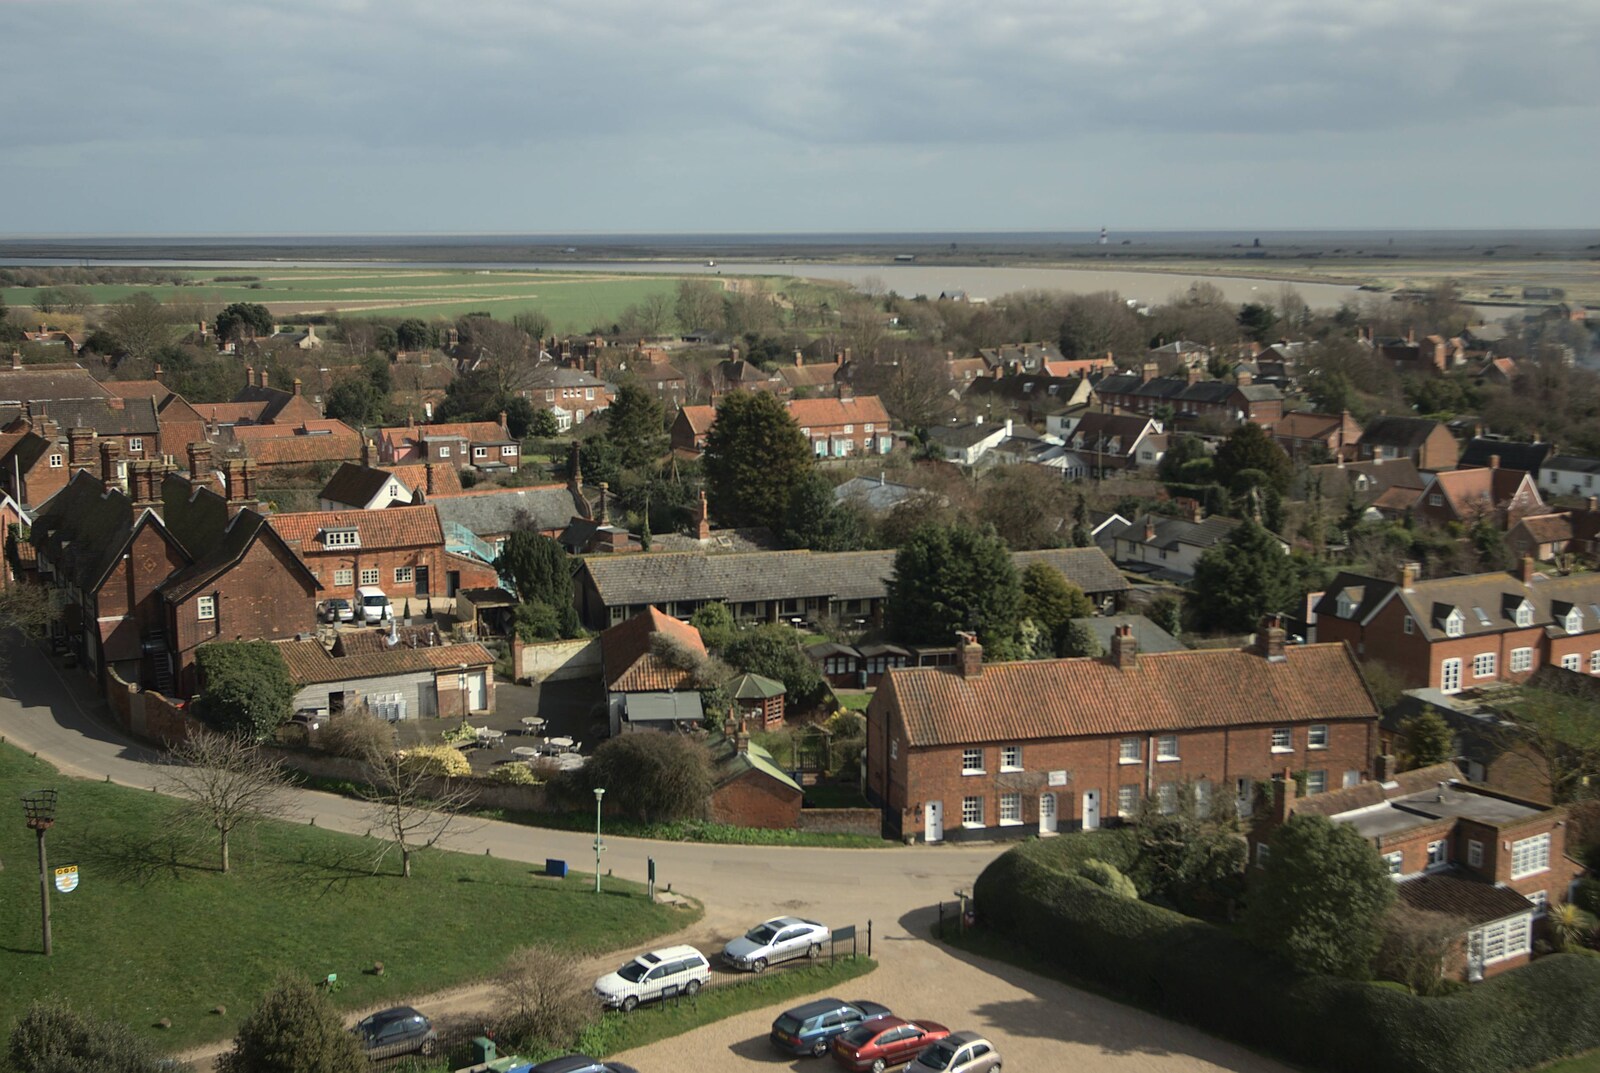 The view from the castle over Orford from A Trip to Orford Castle, Suffolk - 14th March 2009